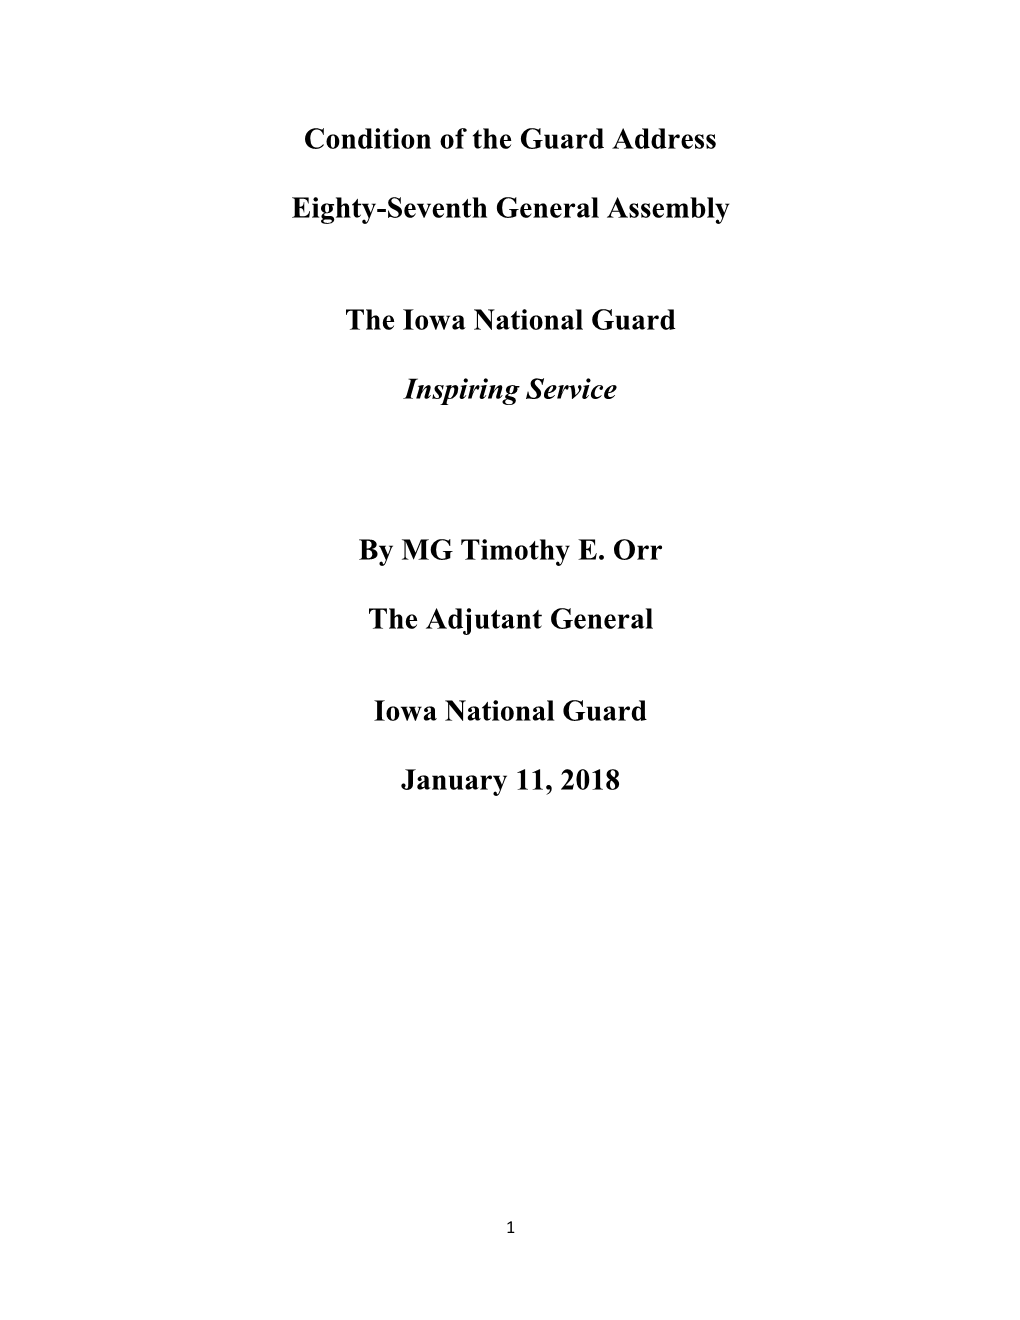 Condition of the National Guard